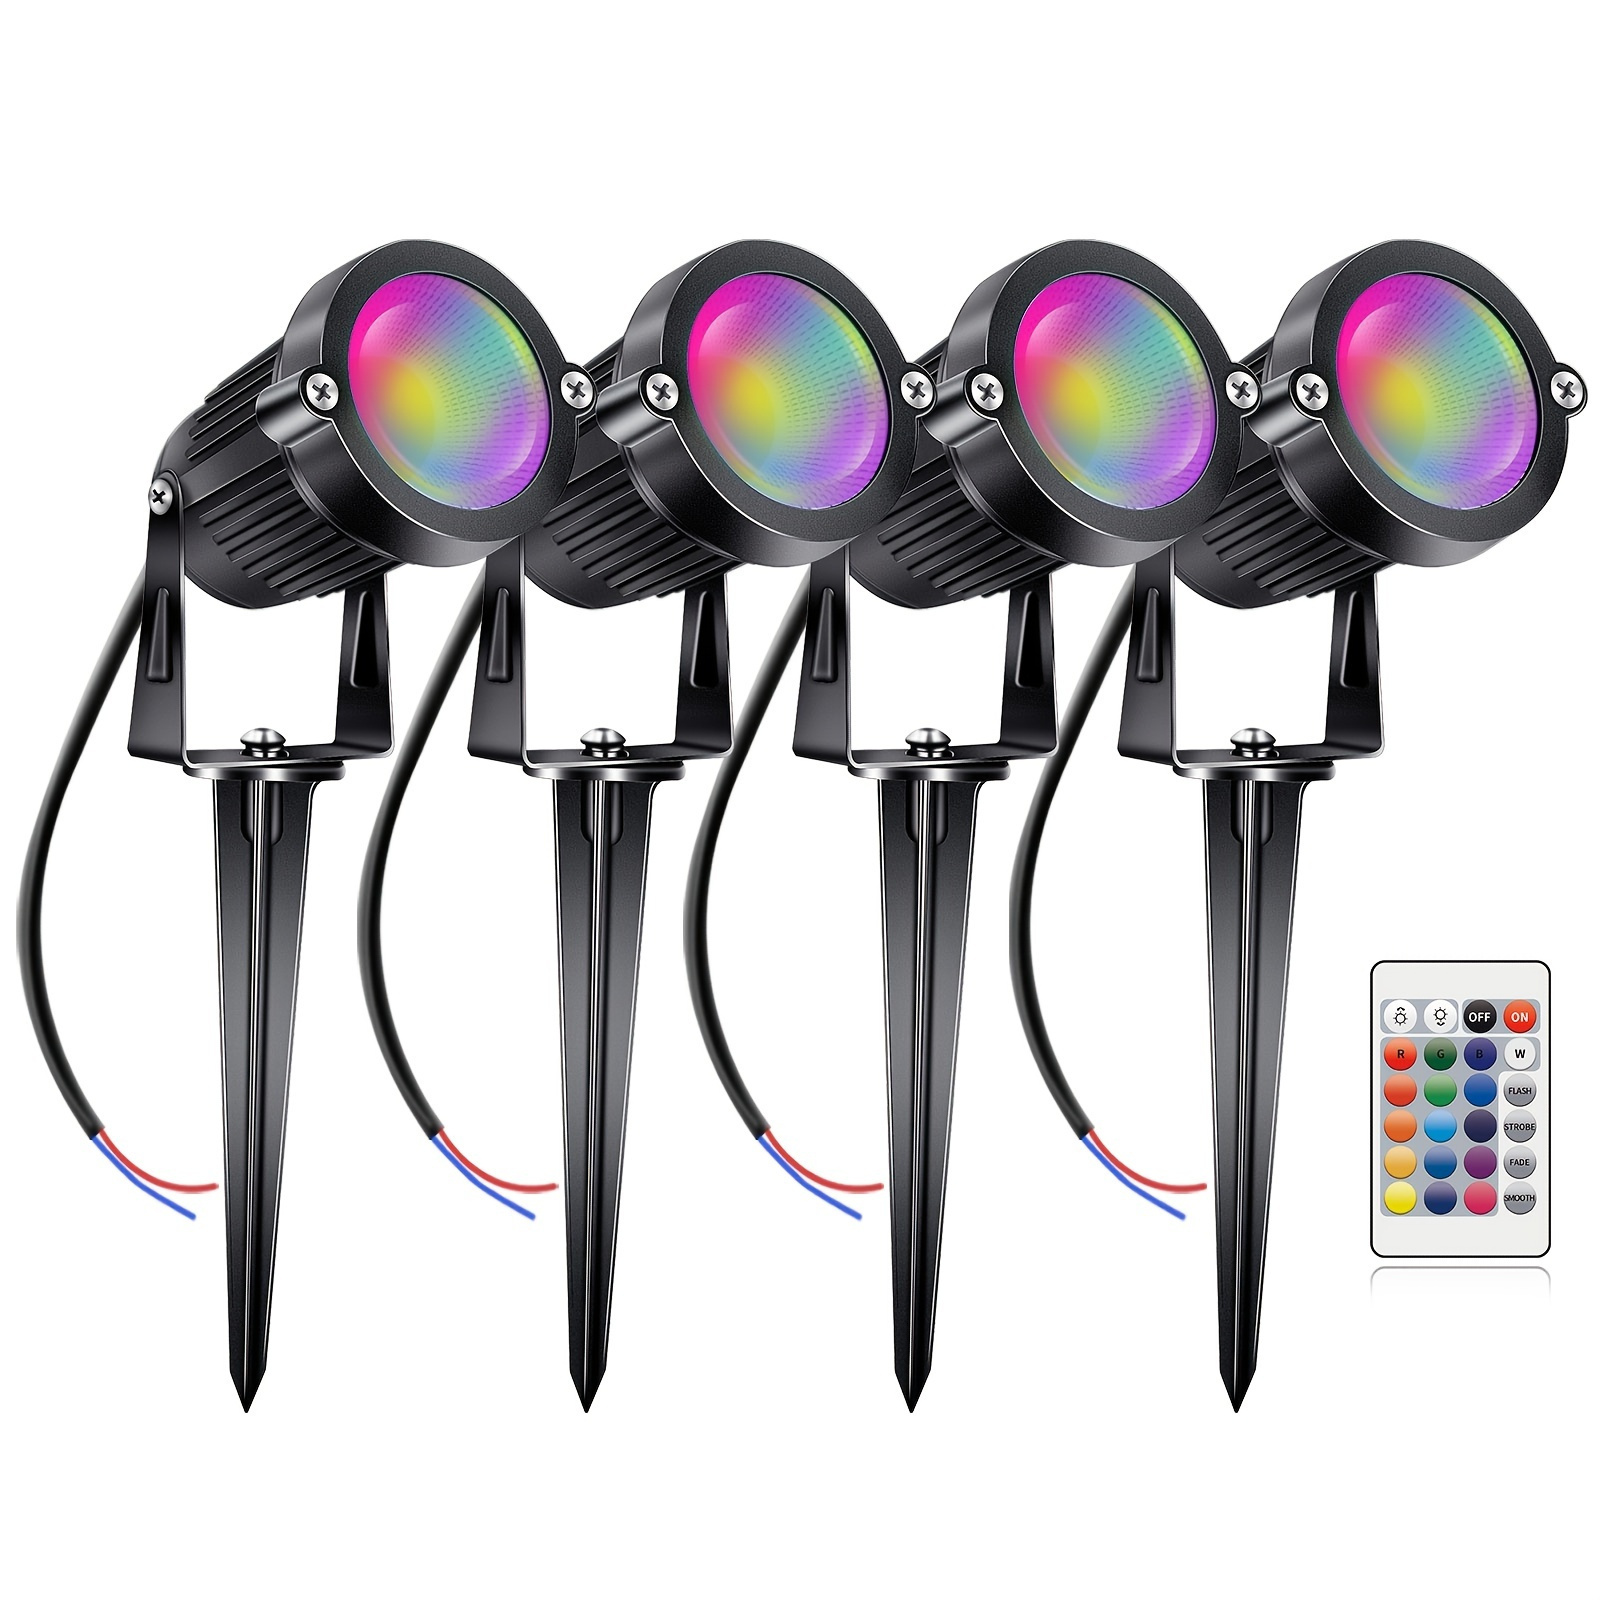 GreenClick RGB LED Landscape Lighting Low Voltage 6-in-1 with Remote  Control, 16 Color Changing Landscape Lights IP65 Waterproof Outdoor  Spotlights